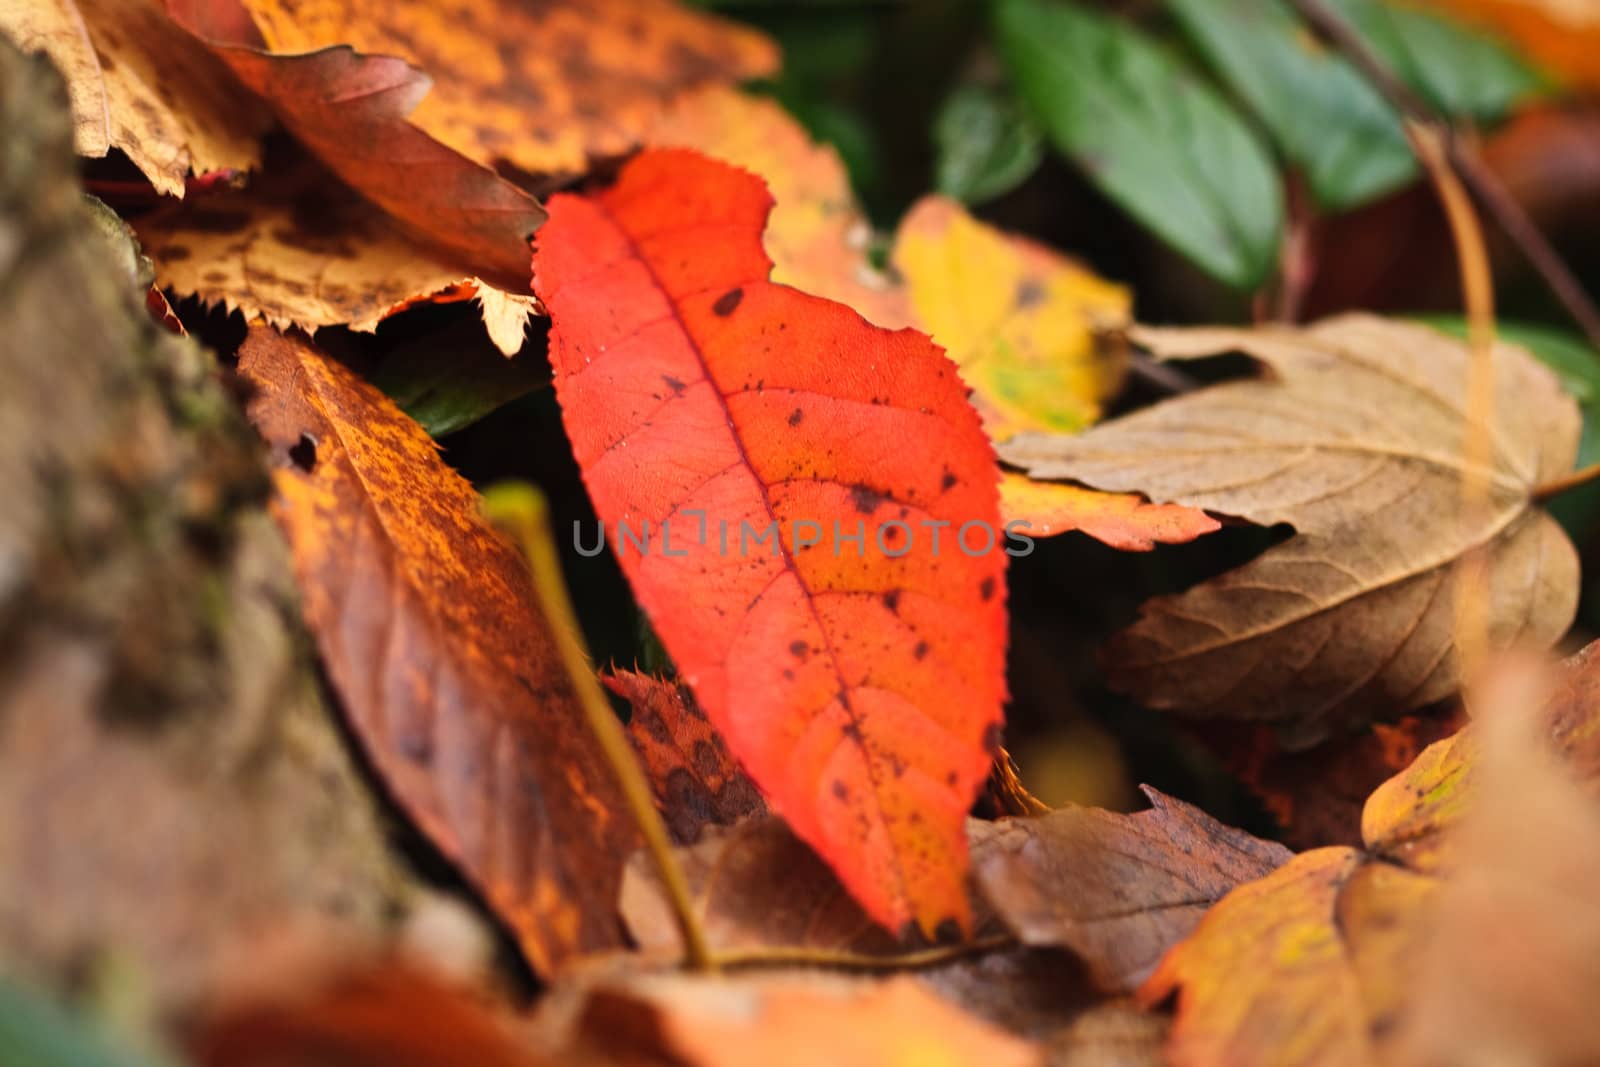 An outdoor autumn scene with colored leafs